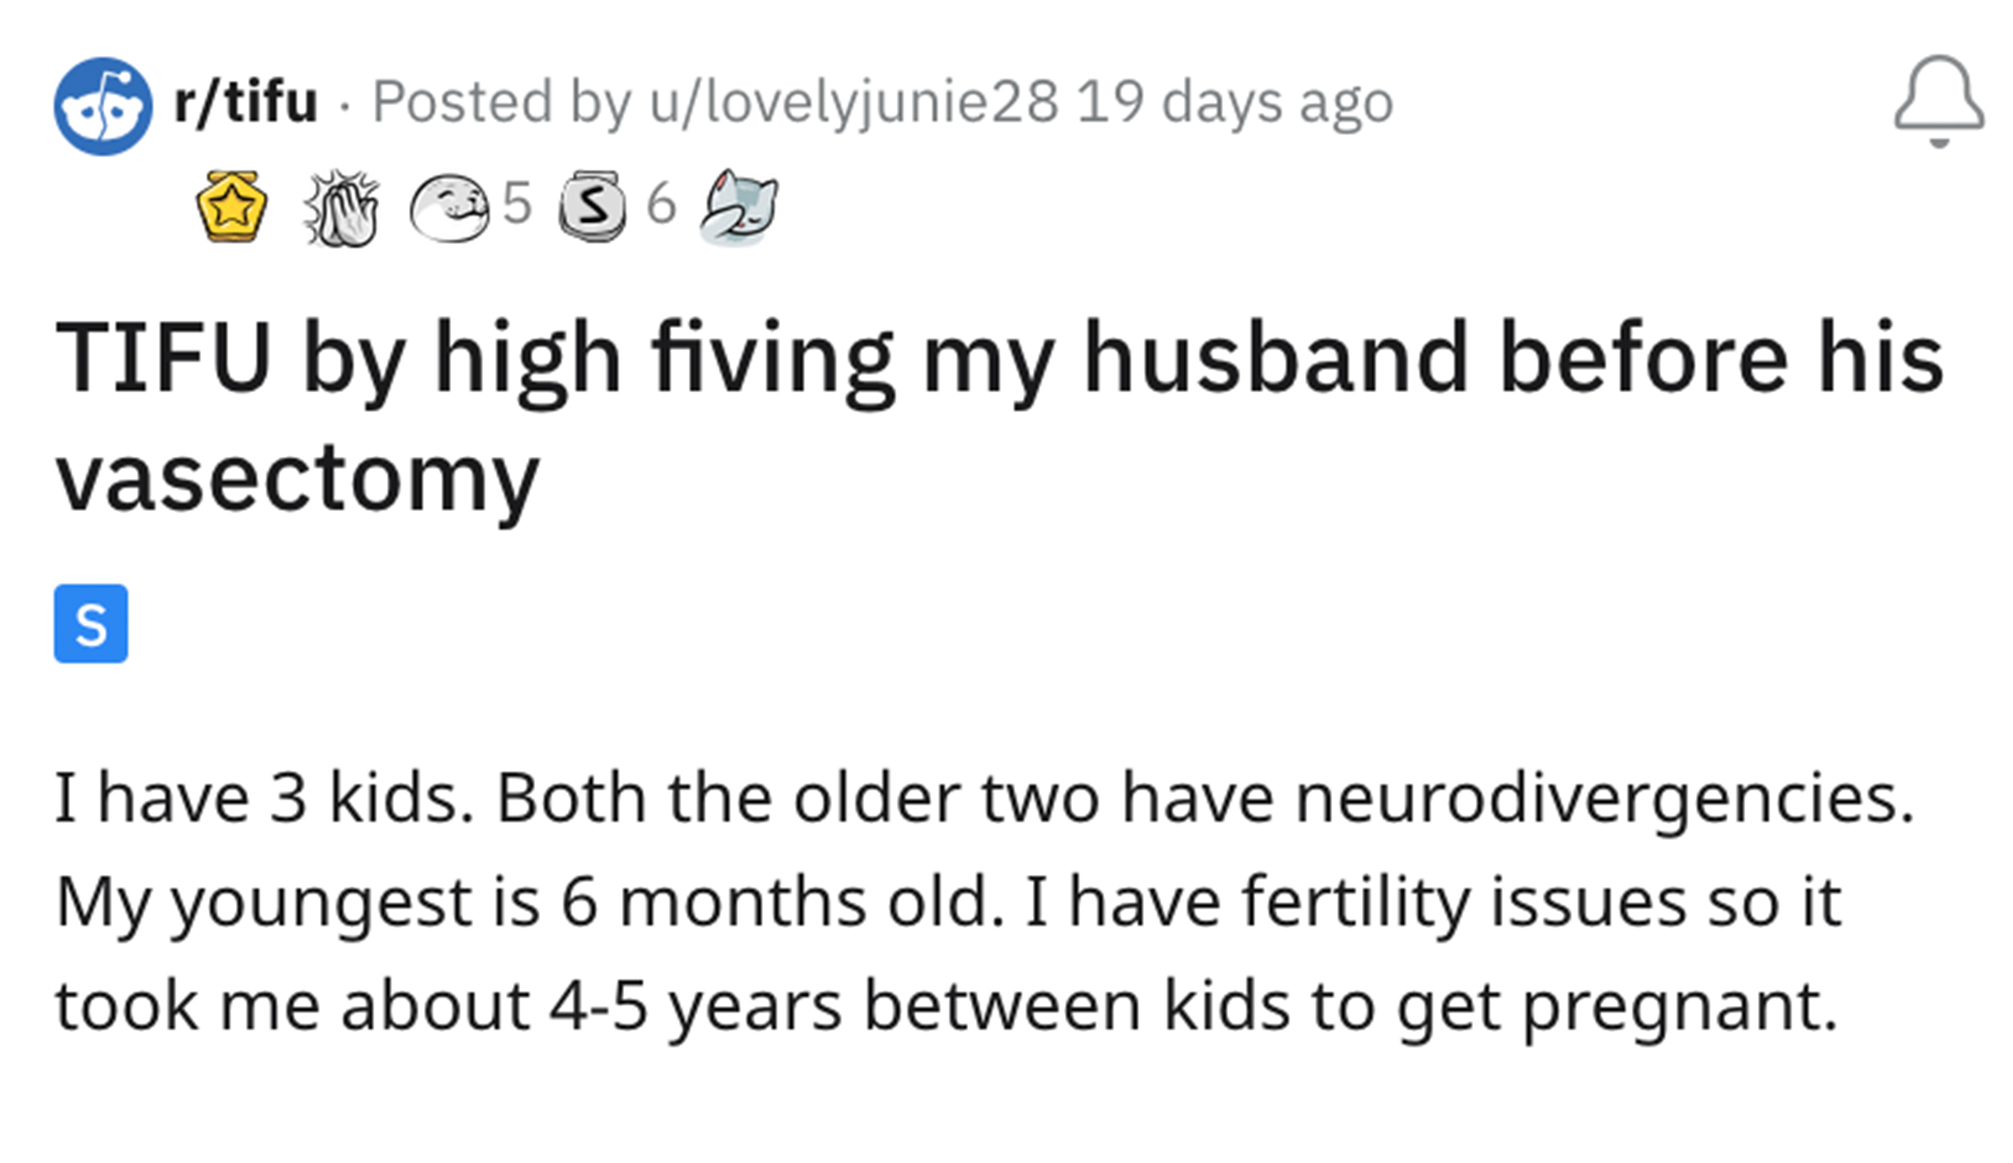 Premature Celebration Story Reddit - cdkl5 - rtifu Posted by ulovelyjunie28 19 days ago 5 36 2 Tifu by high fiving my husband before his vasectomy S I have 3 kids. Both the older two have neurodivergencies. My youngest is 6 months old. I have fertility is